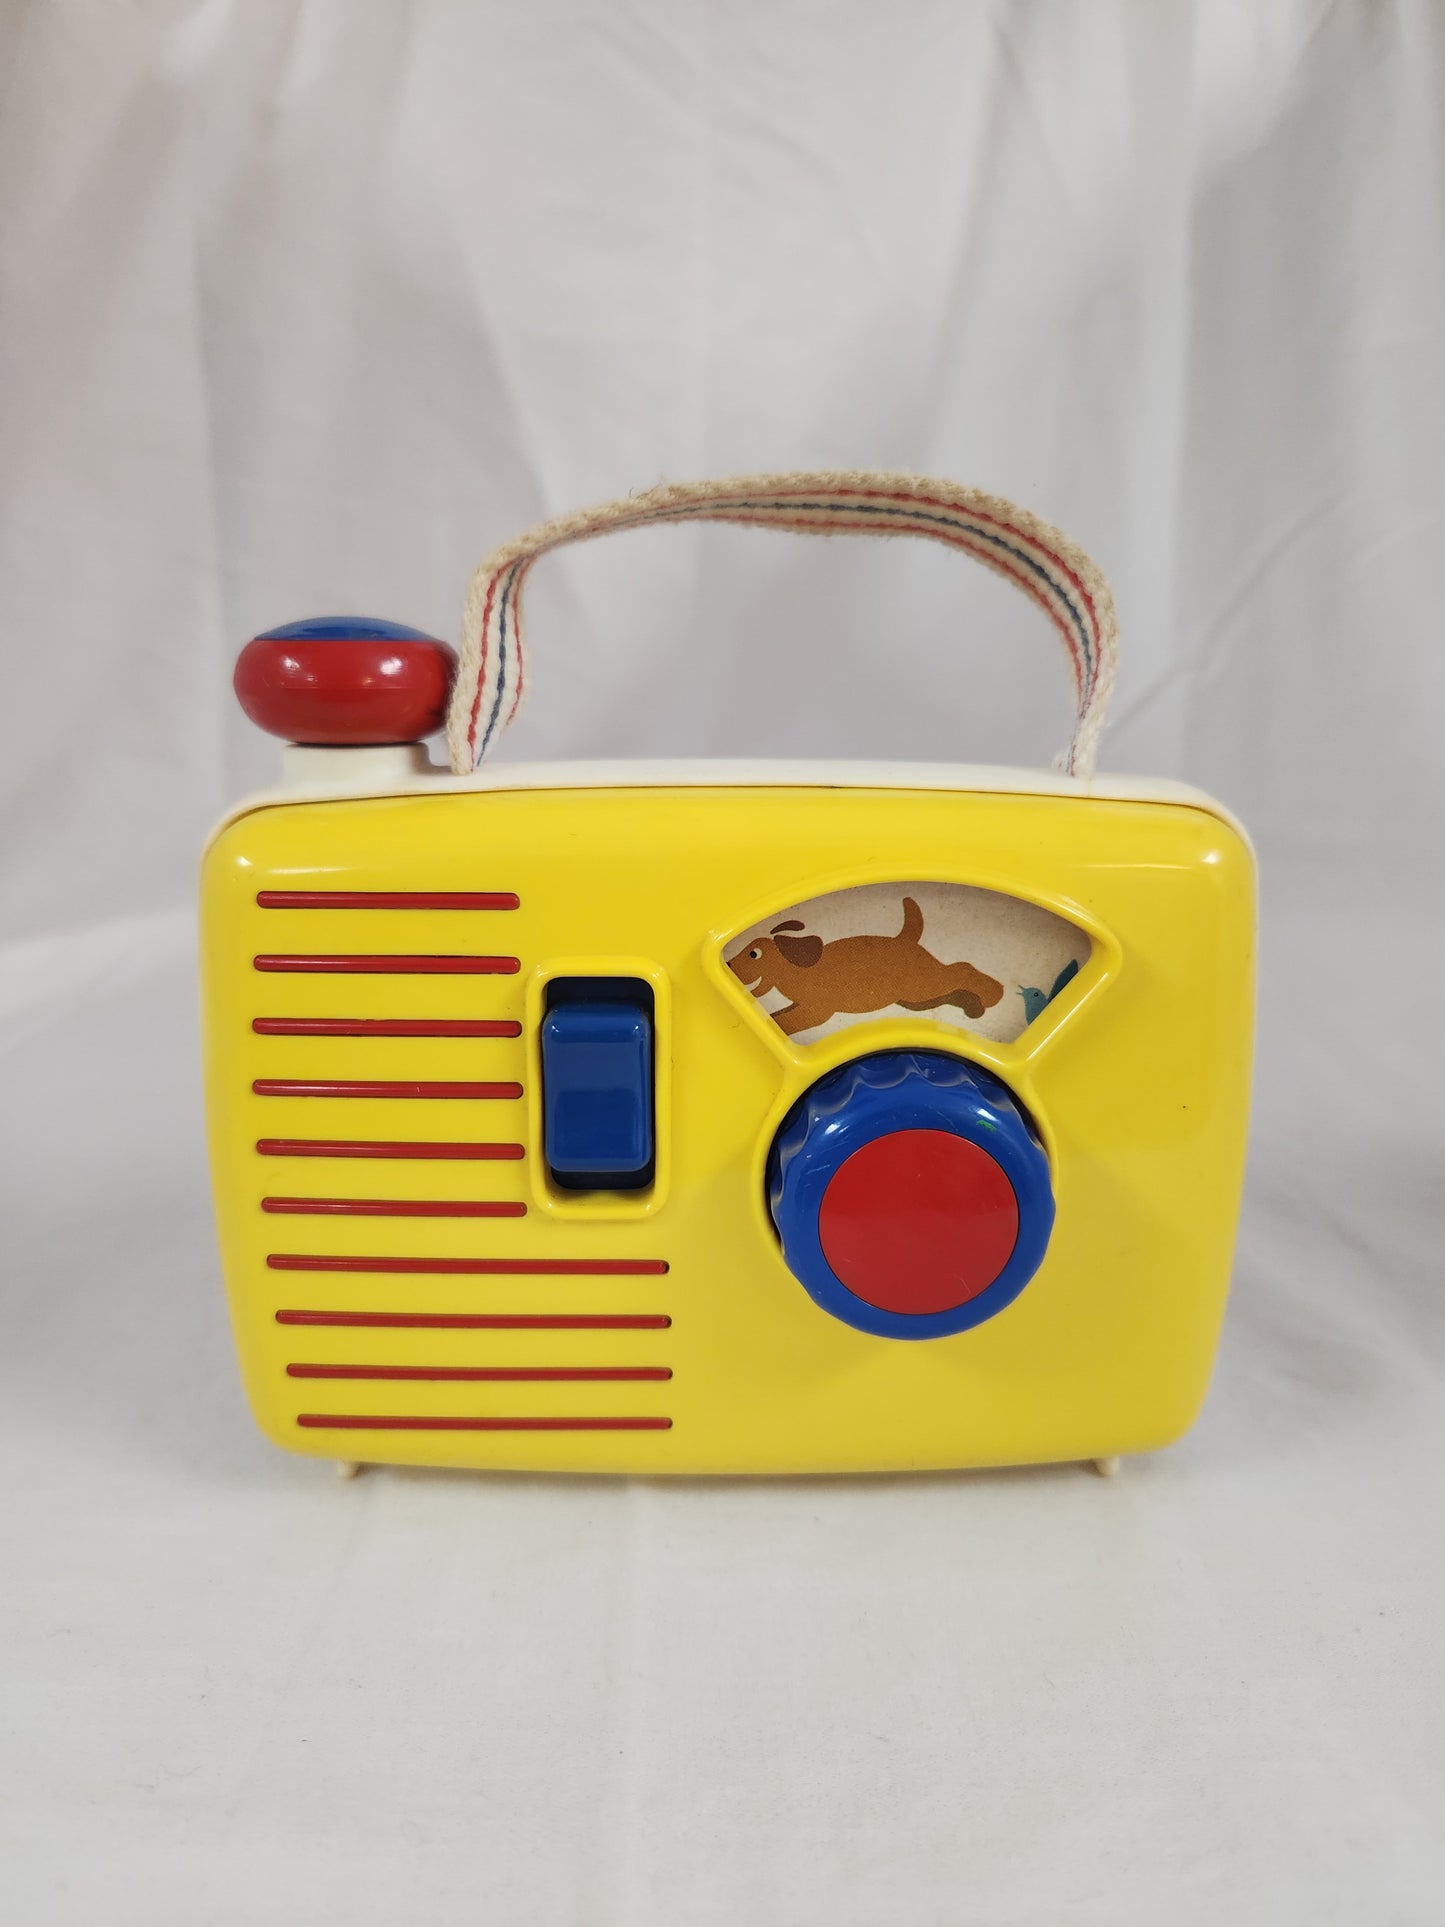 RETRO - Ambi Toys Yellow Radio Playing "How much is that doggie in the window"